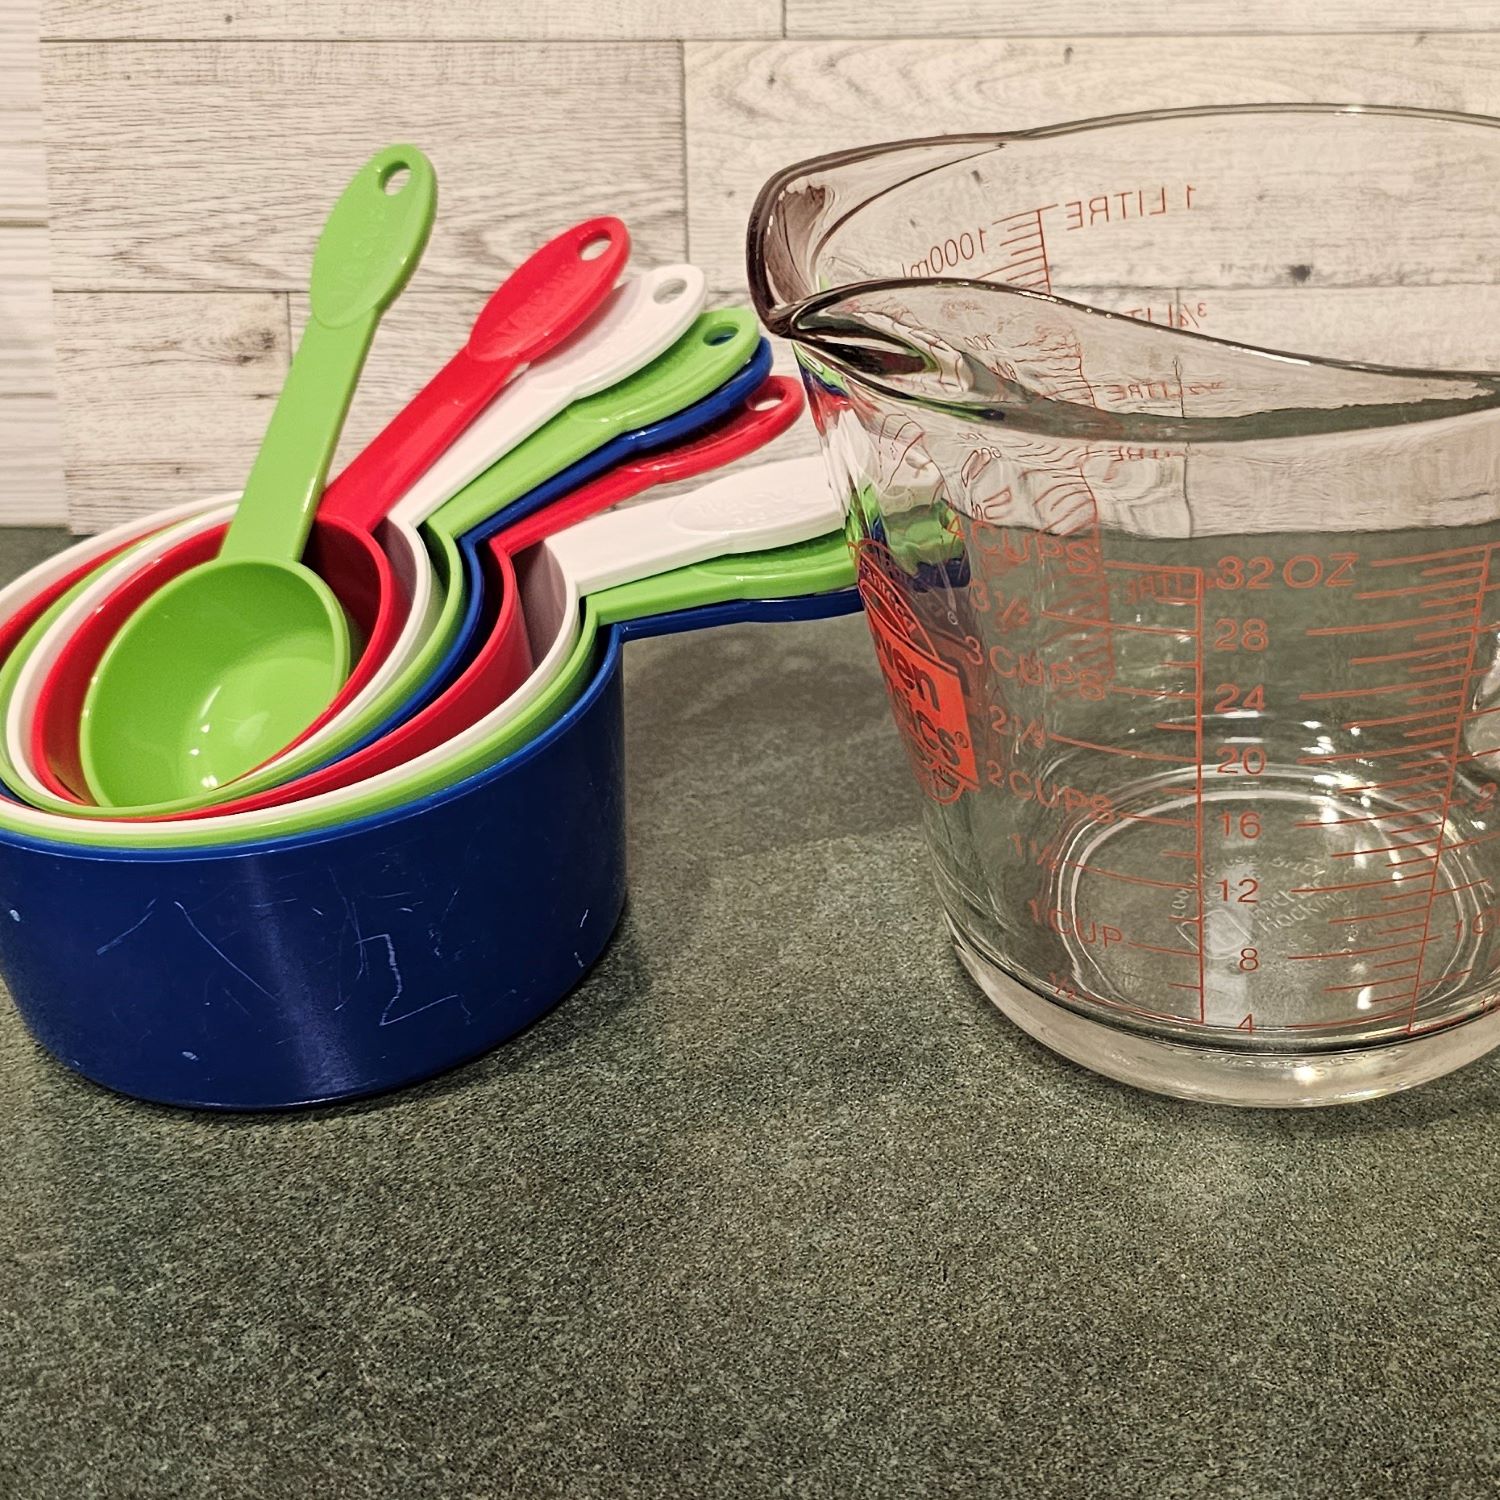 A liquid measuring cup and the metric system